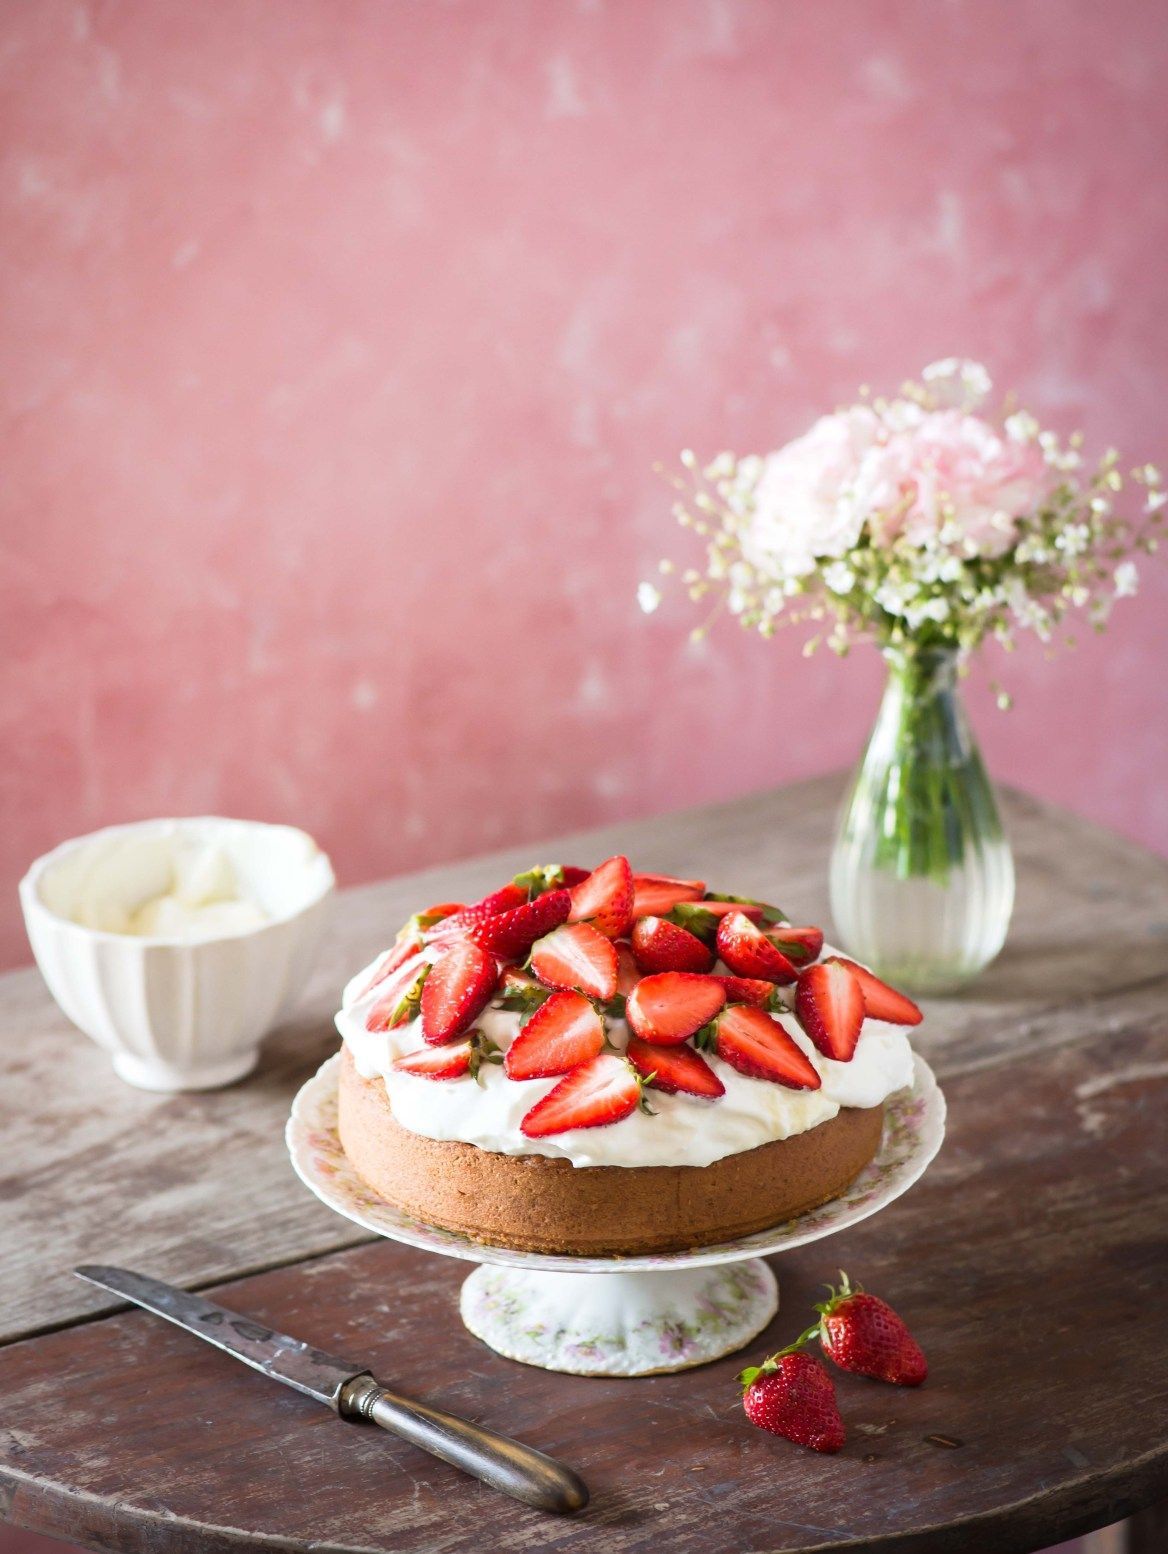 Roasted Almond Cake With Strawberries & Cream -   16 cake Strawberry photography ideas